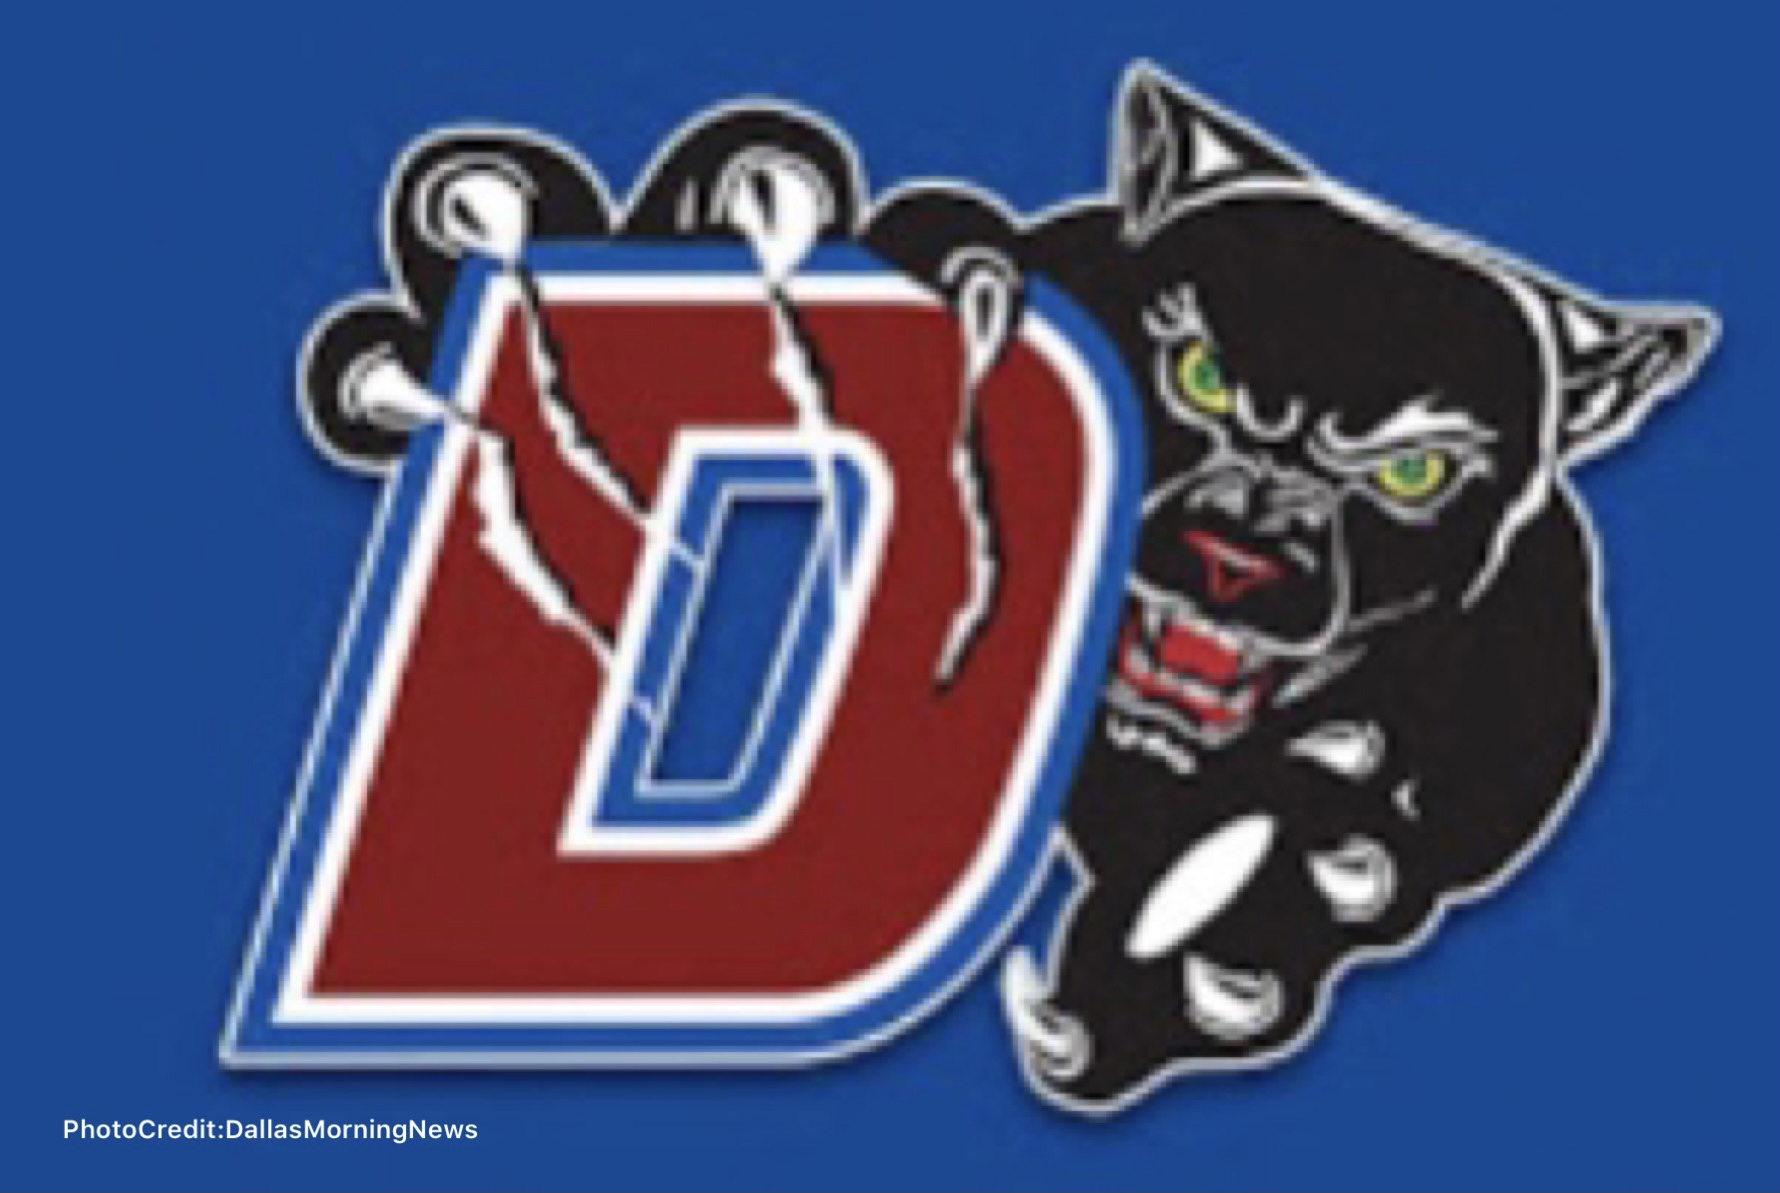 Duncanville ISD Basketball Coach And Four Players Suspended During